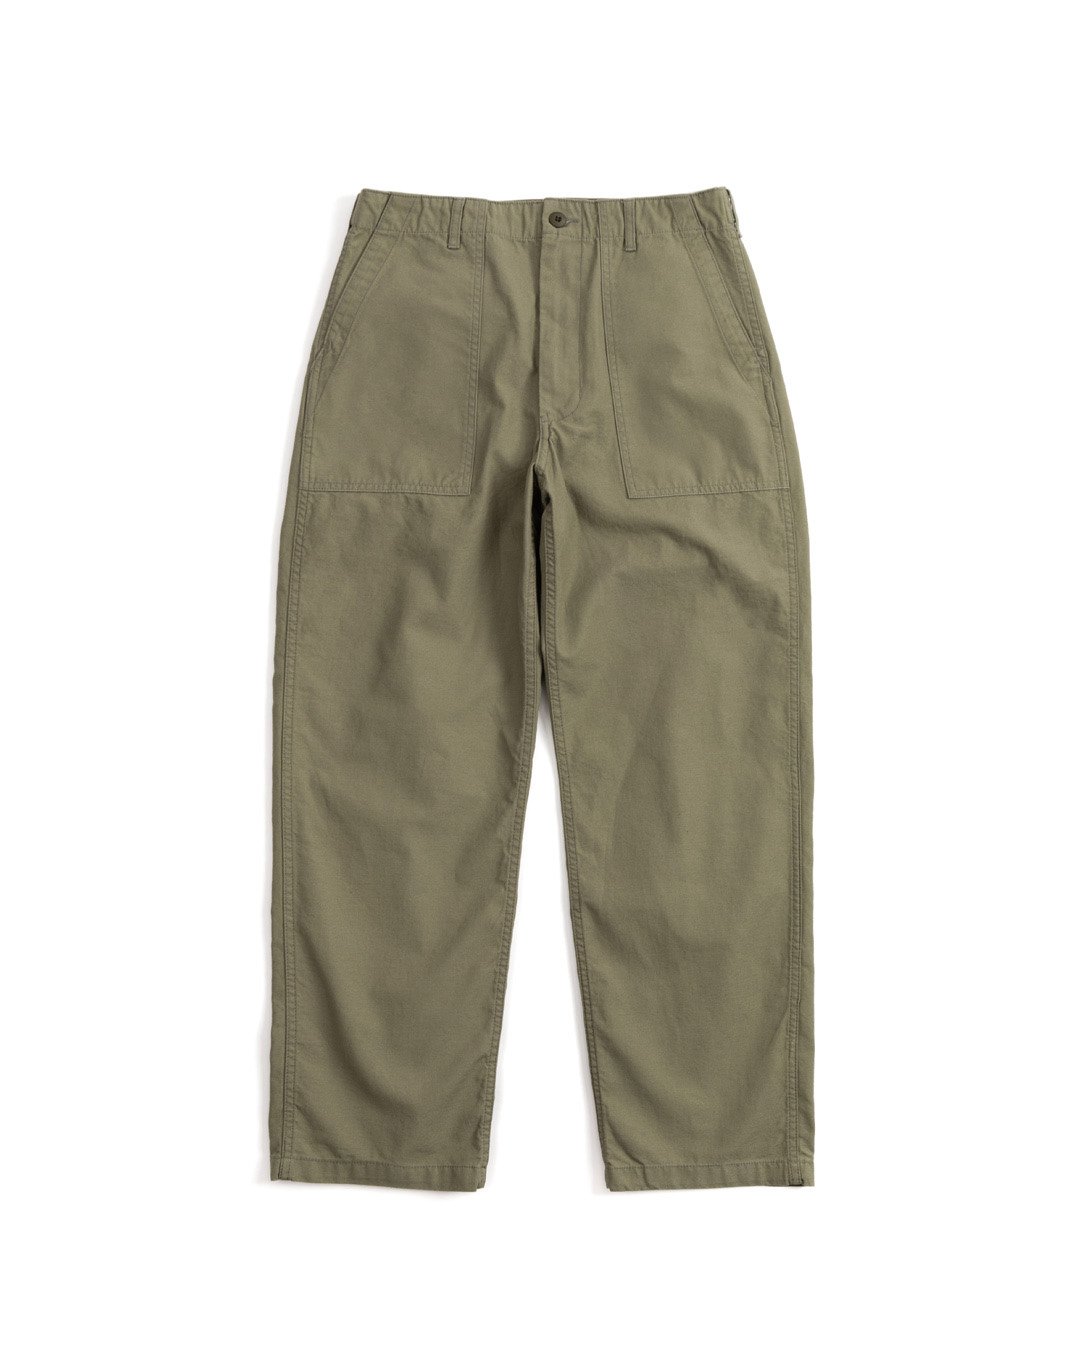 07 UTILITY FATIGUE PANTS (olive green)